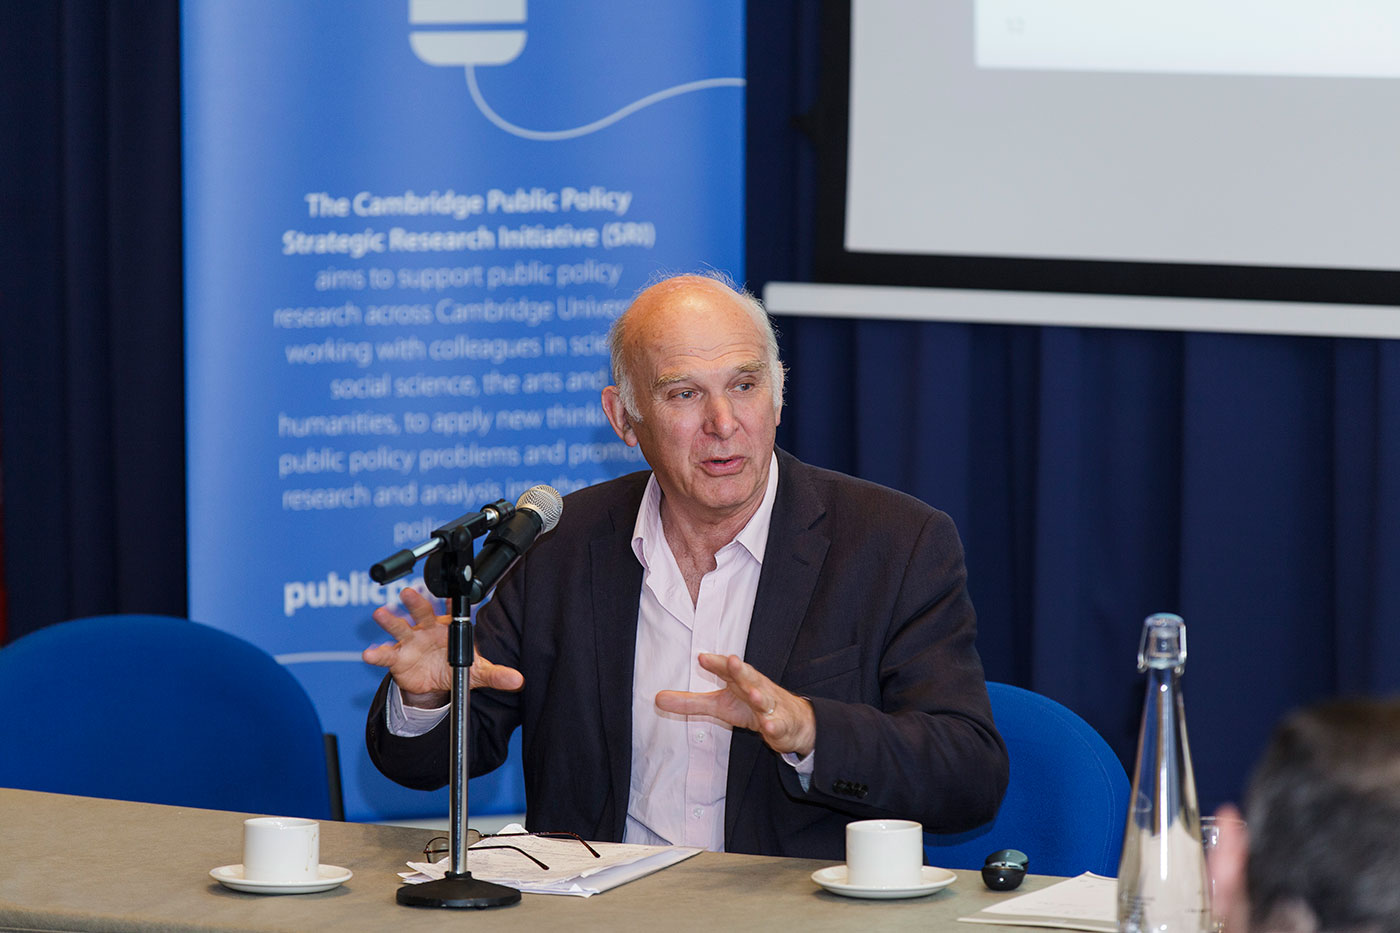 ‘Inequality, what’s new?’ - Sir Vince Cable's image